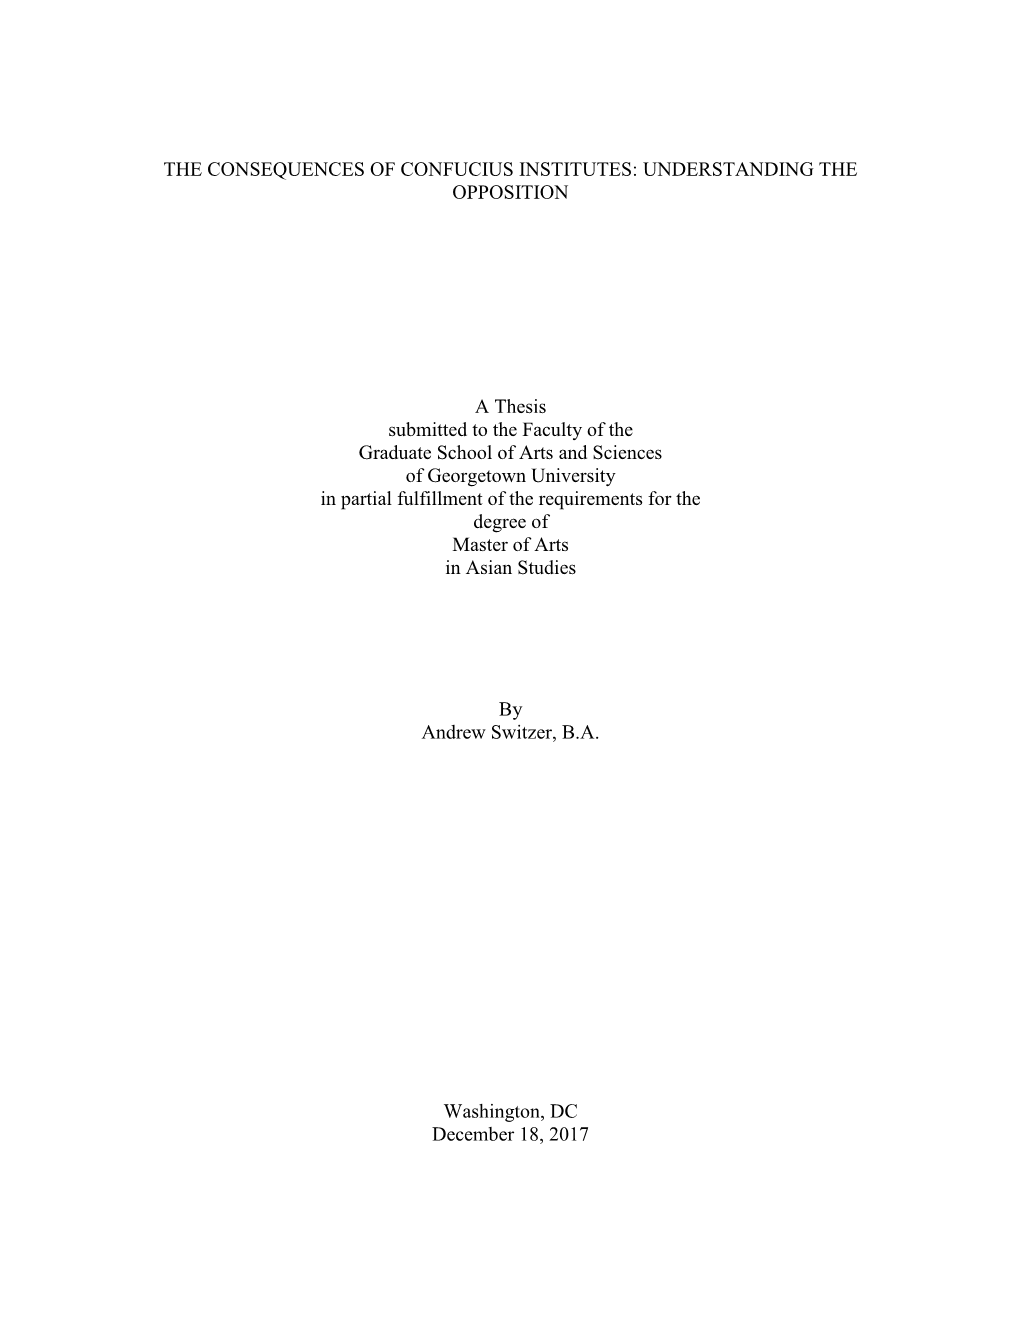 THE CONSEQUENCES of CONFUCIUS INSTITUTES: UNDERSTANDING the OPPOSITION a Thesis Submitted to the Faculty of the Graduate School